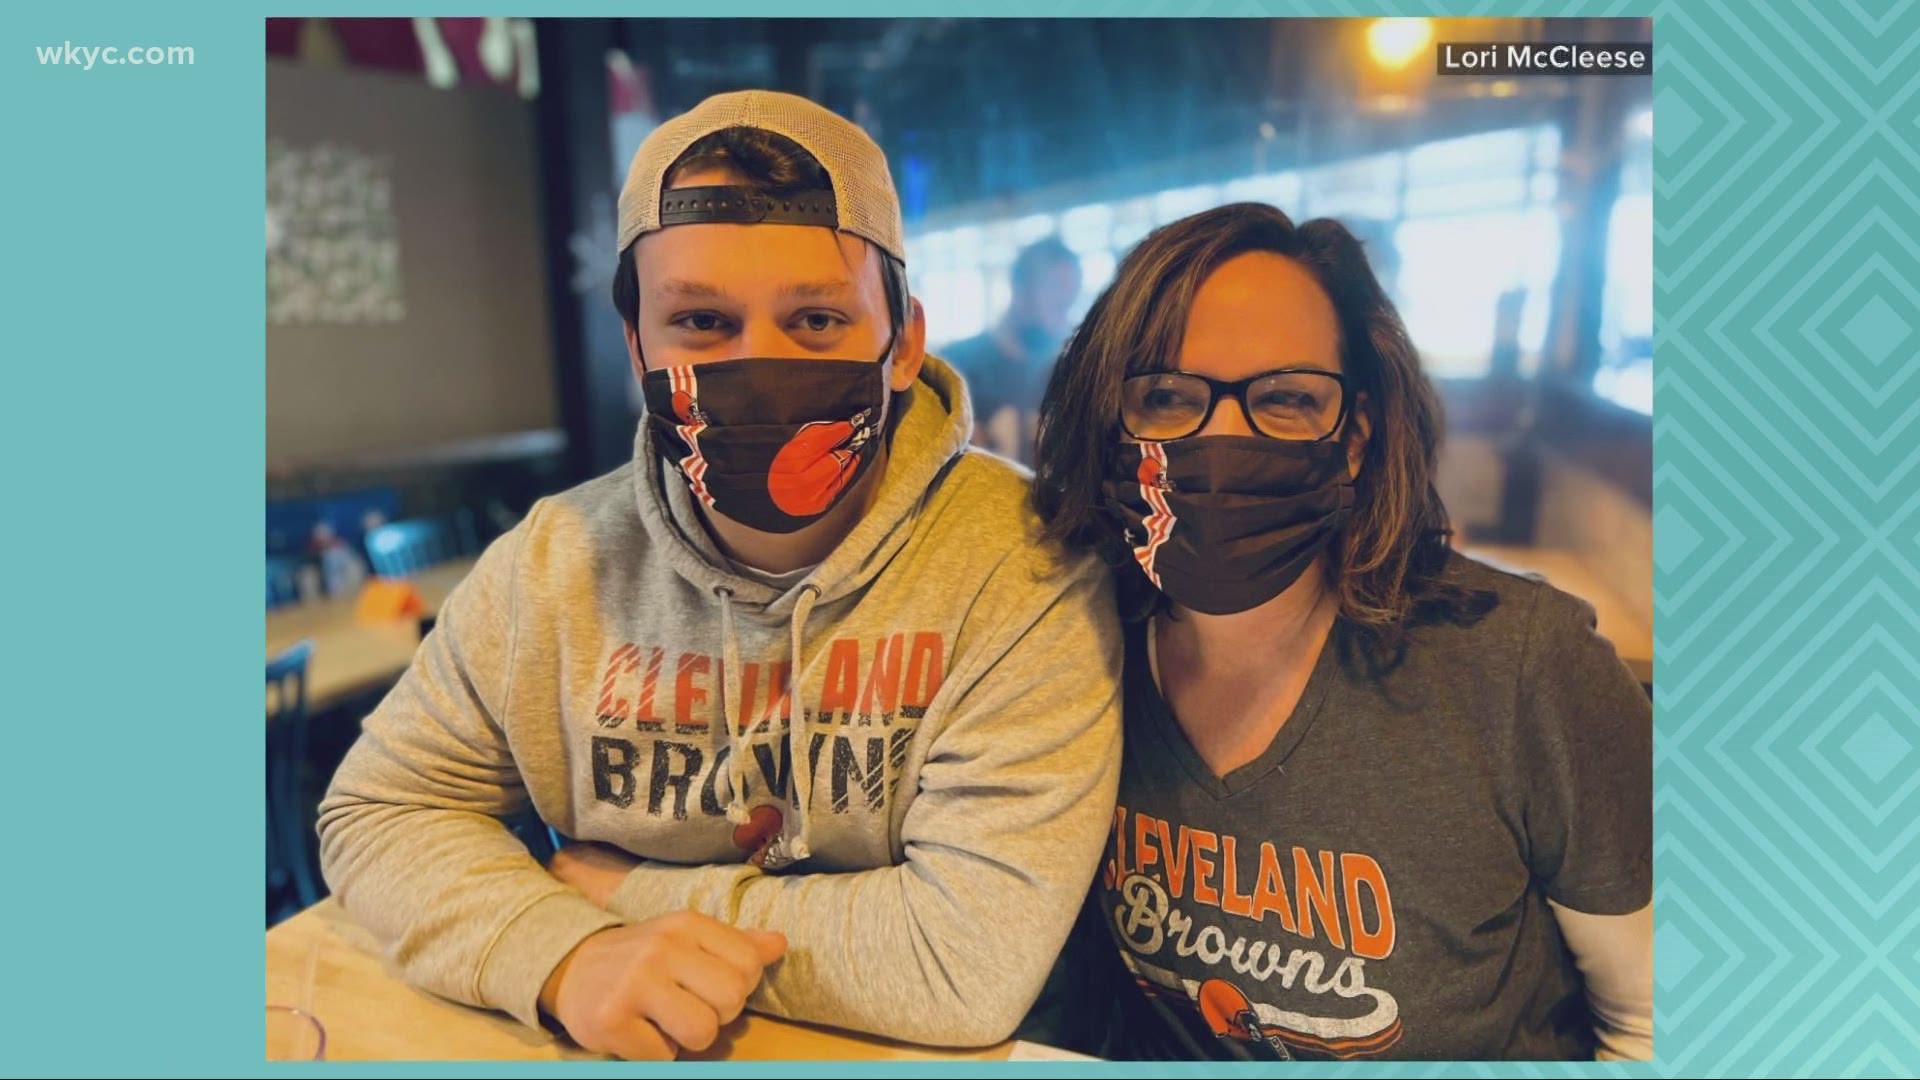 Are your pumped for the Browns game? You aren't alone. 3News viewers sent us their photos of how they are getting ready for Sunday's big game.